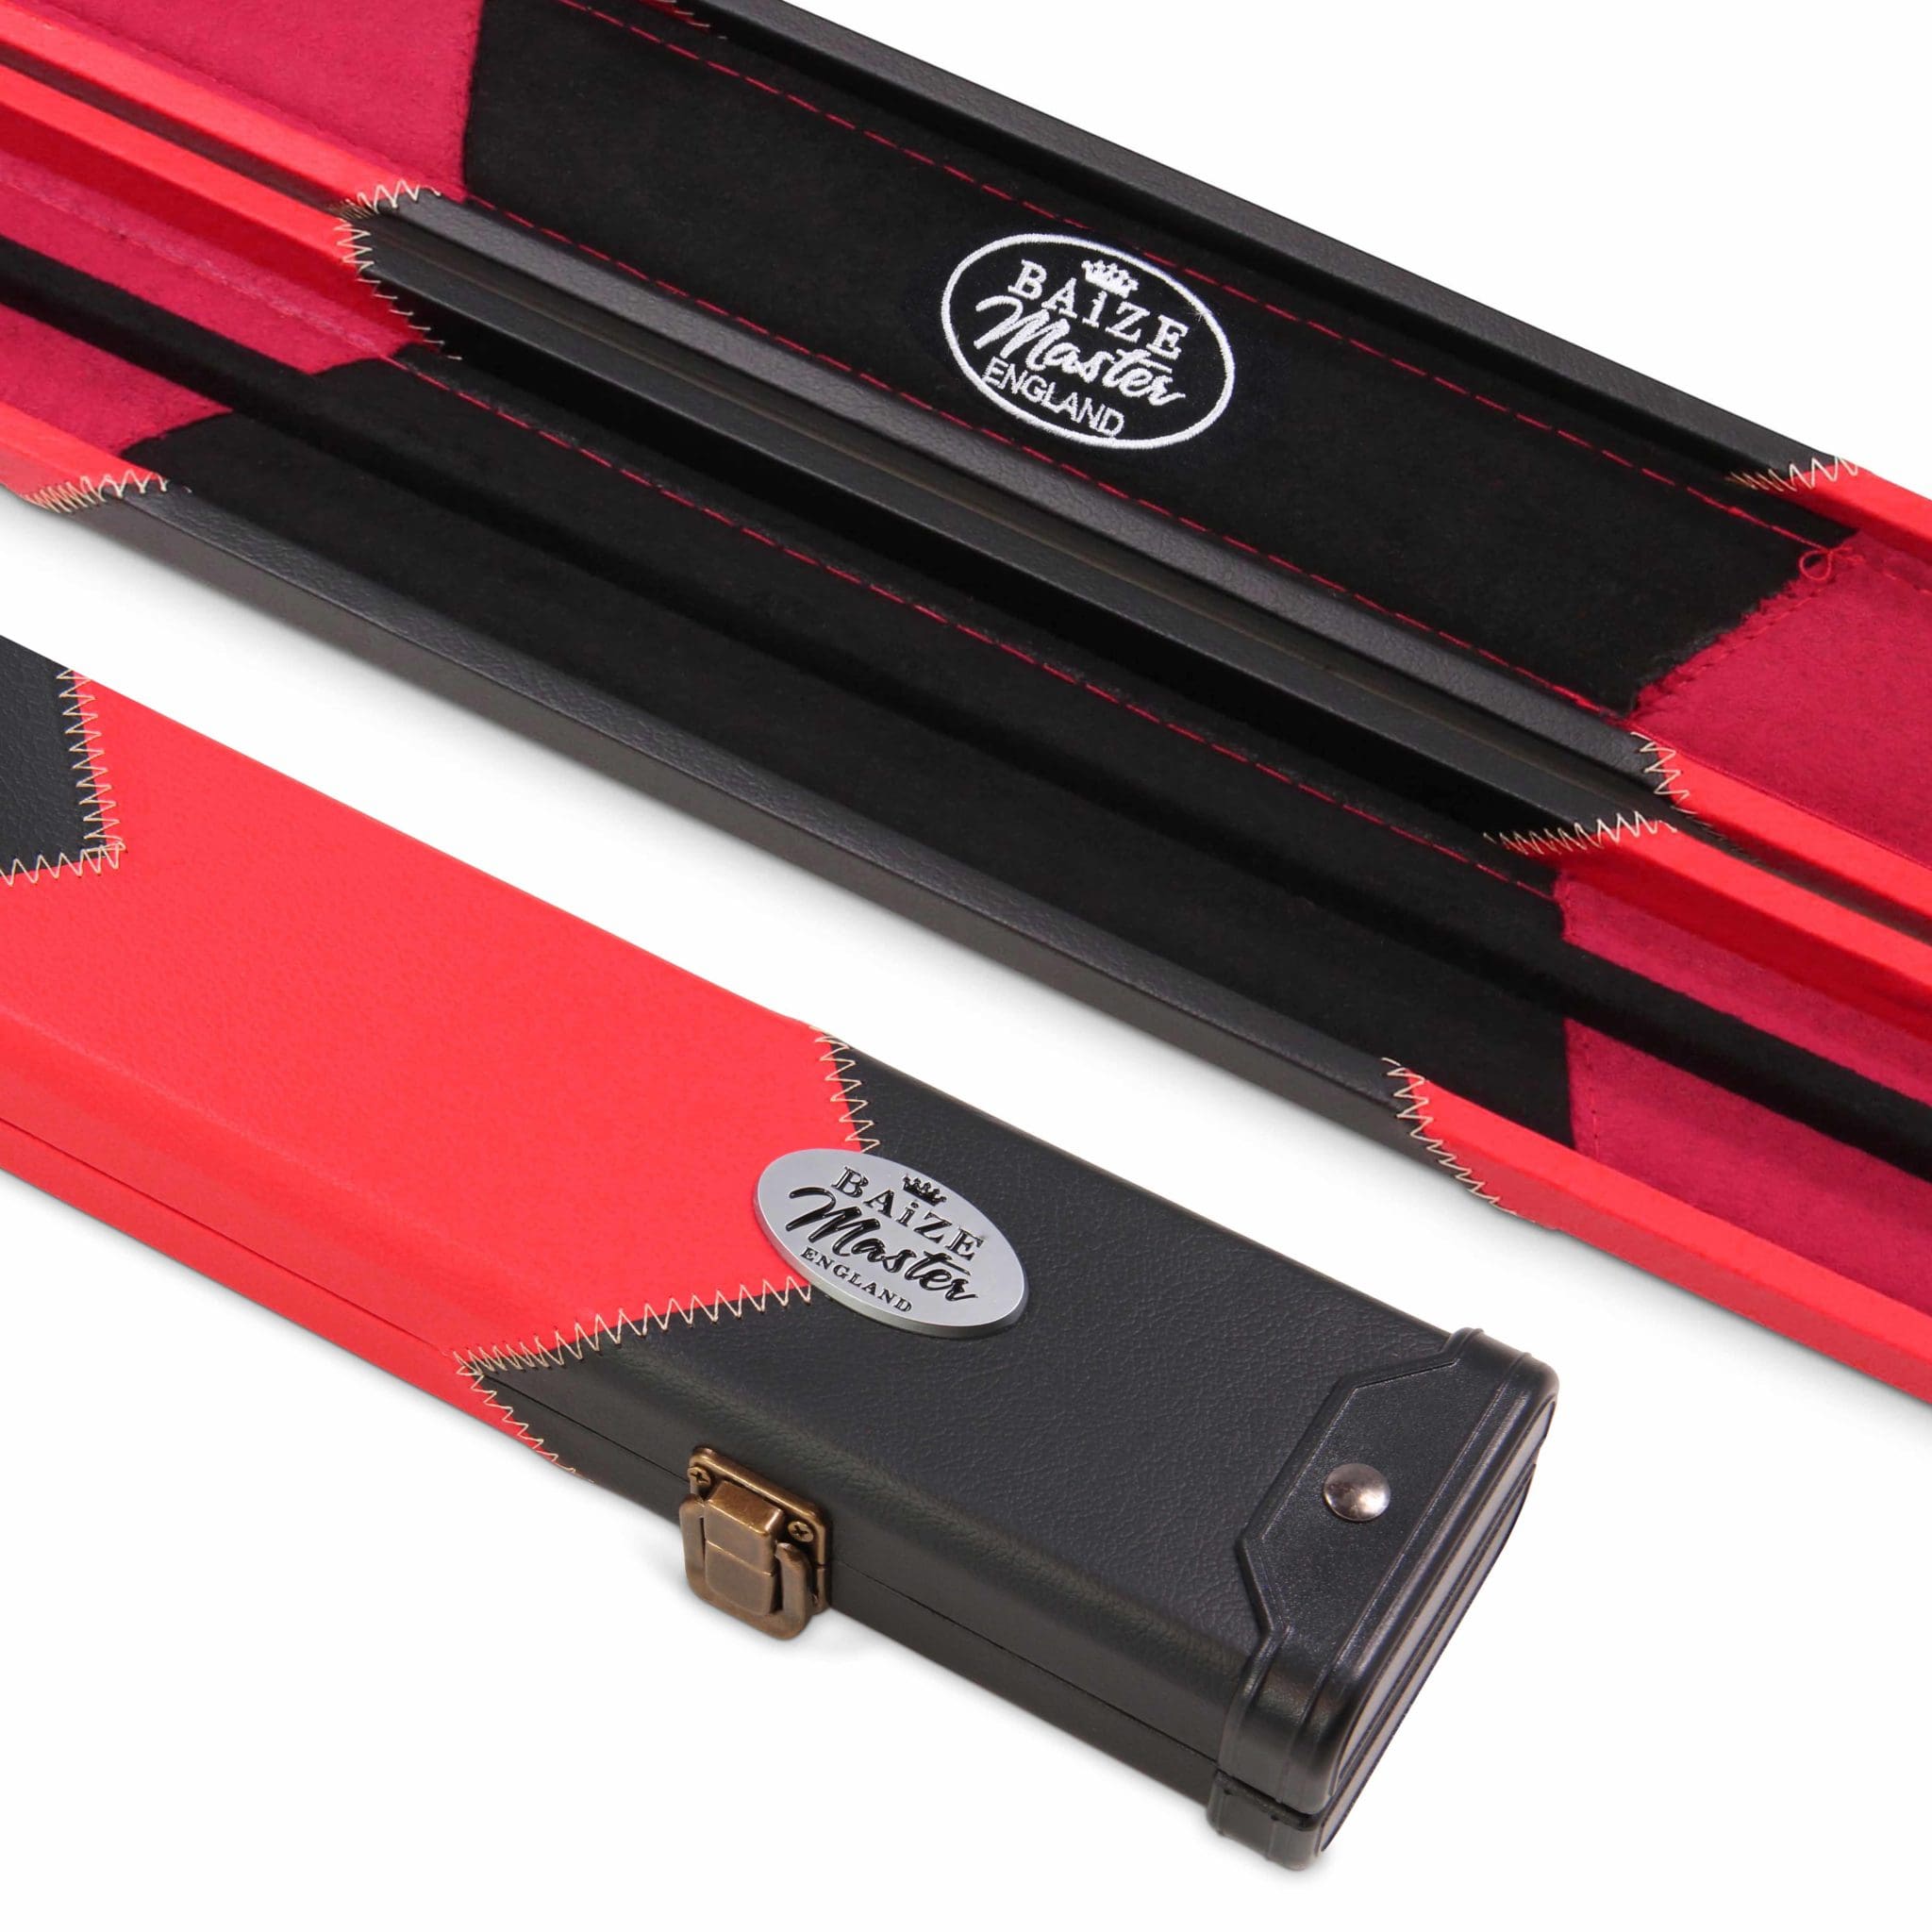 BAIZE MASTER Deluxe RED ARROW 2pc Snooker Pool Cue Case with Matching ...